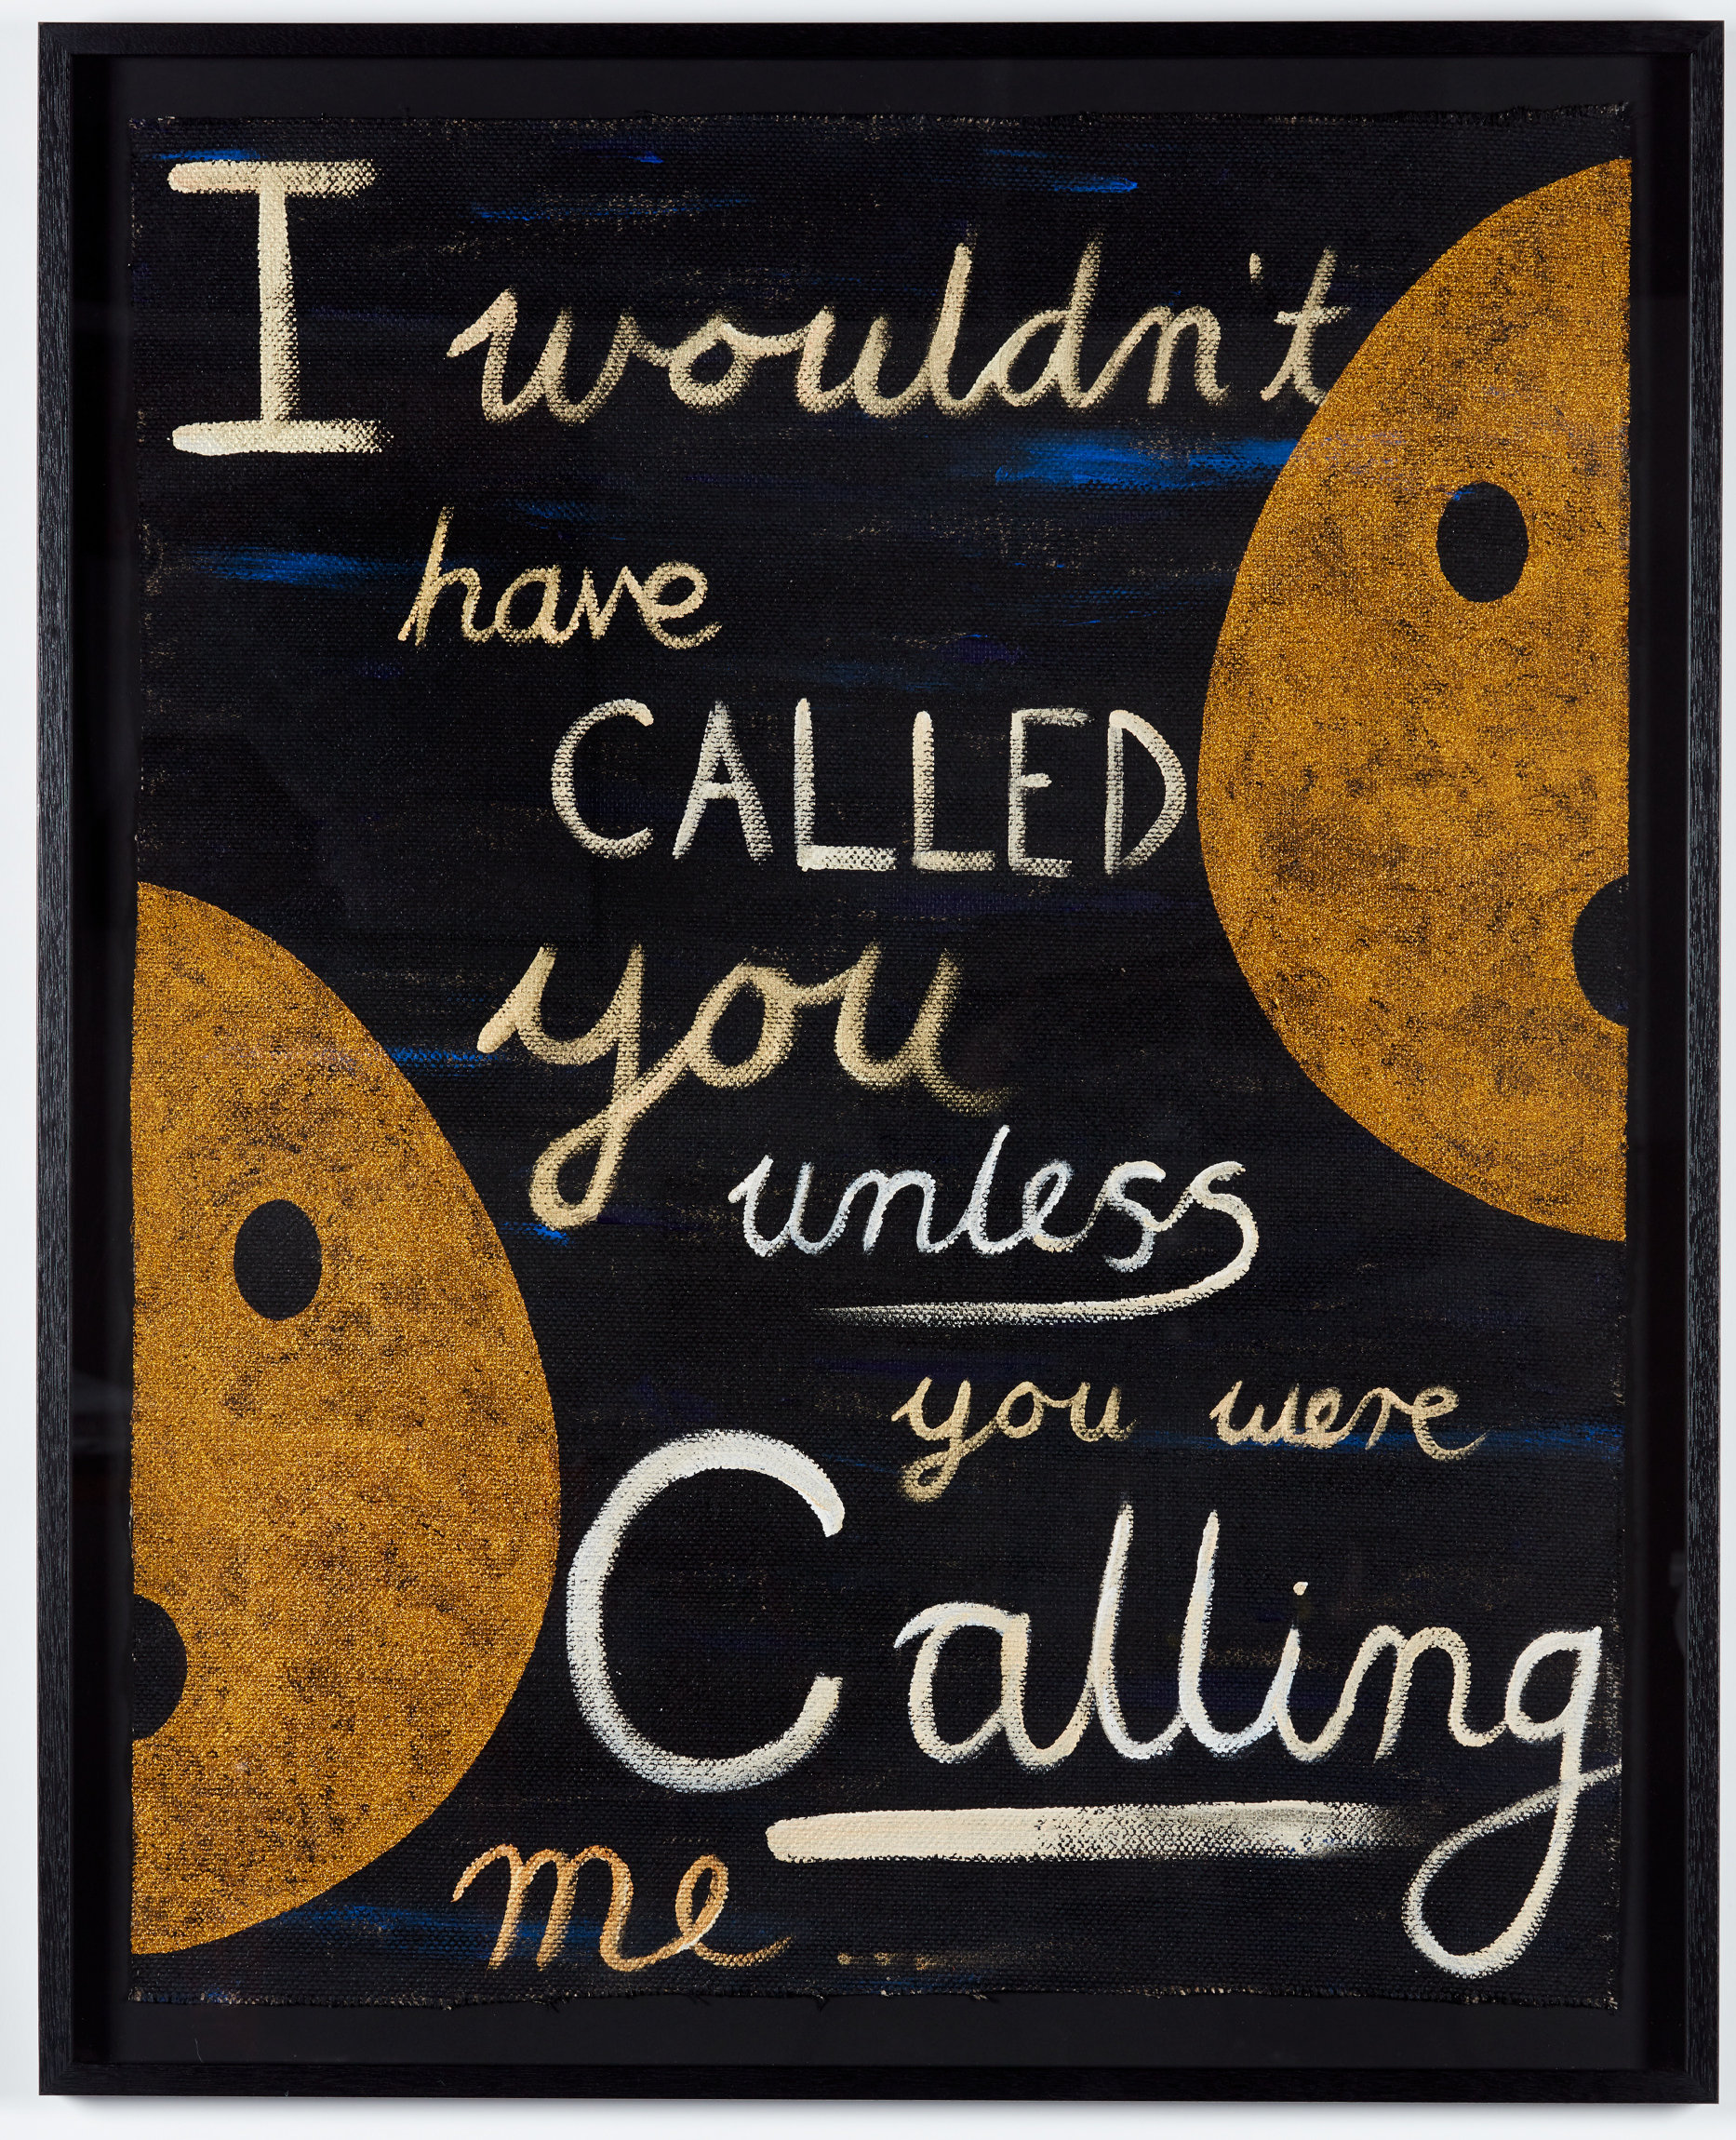 I wouldn’t have CALLED to you unless you were calling me, Nell 2019